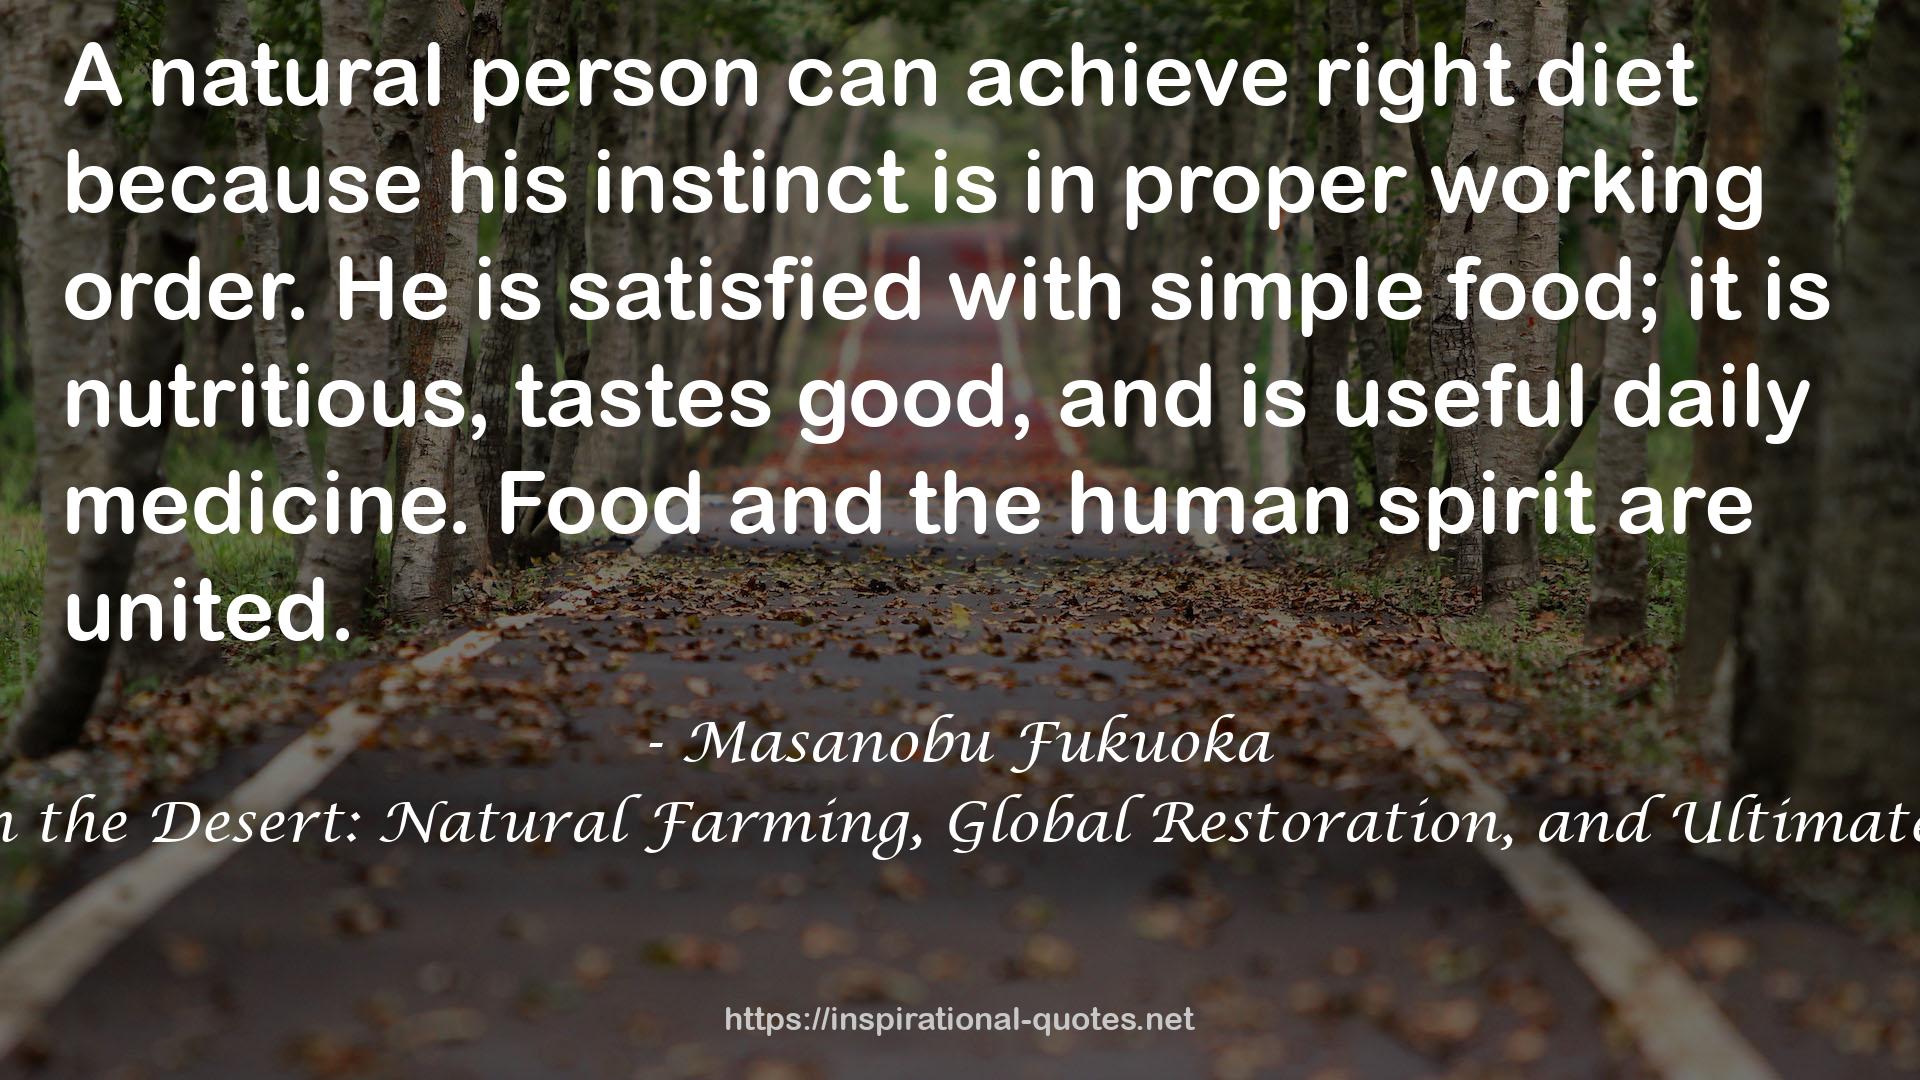 Sowing Seeds in the Desert: Natural Farming, Global Restoration, and Ultimate Food Security QUOTES